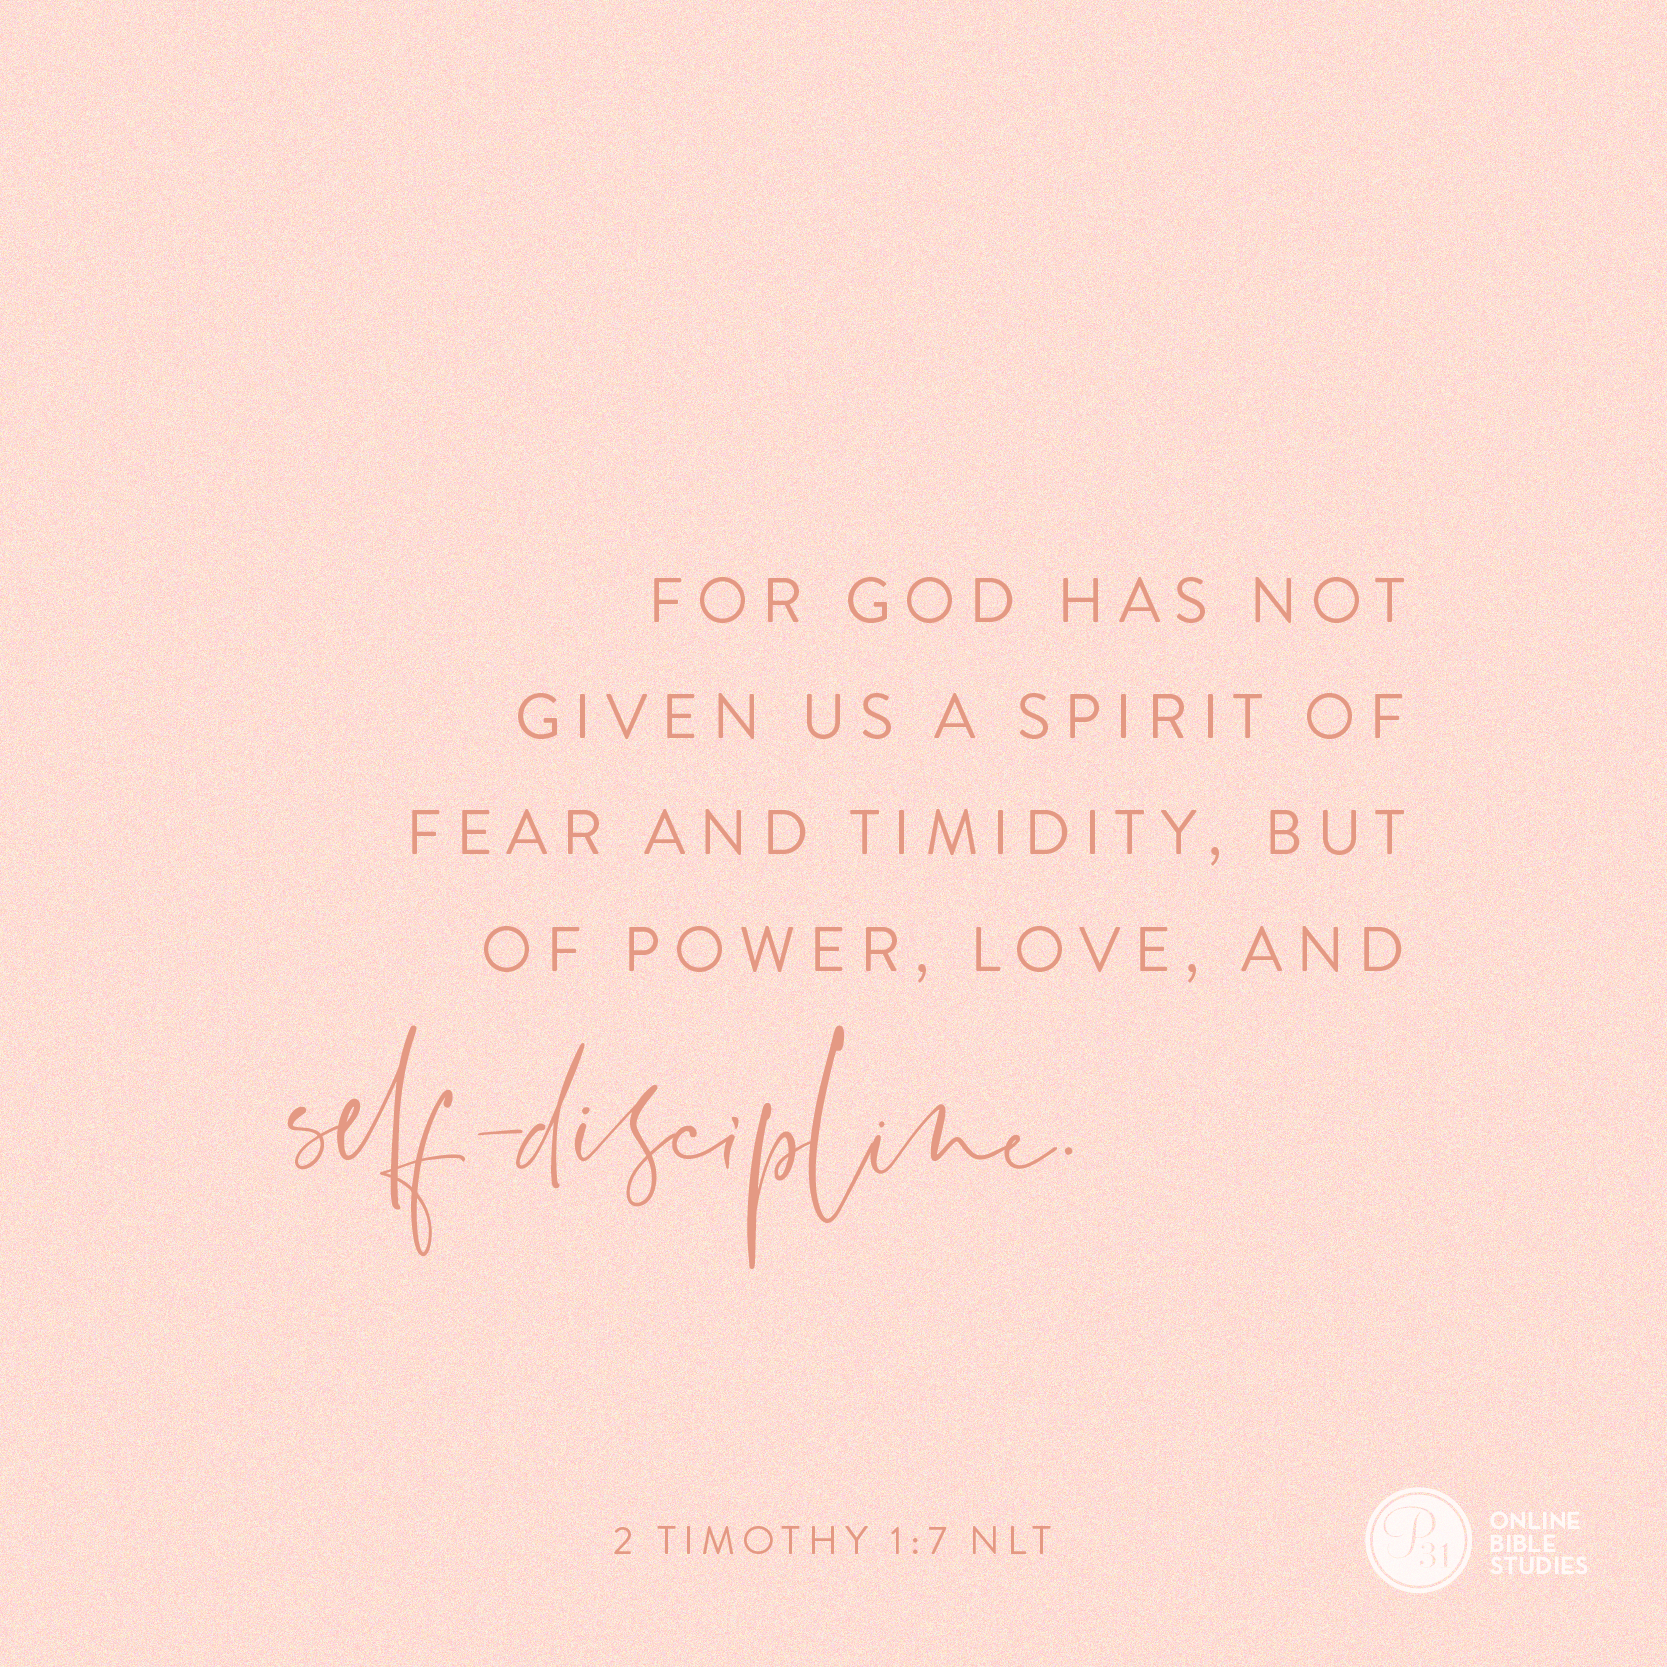 2 Timothy 1:7 (NLT) | "For God has not given us a spirit of fear and timidity, but of power, love and self-discipline." | Proverbs 31 Online Bible Studies | Week 3 Verse |  #HiddenJoyBook #P31OBS